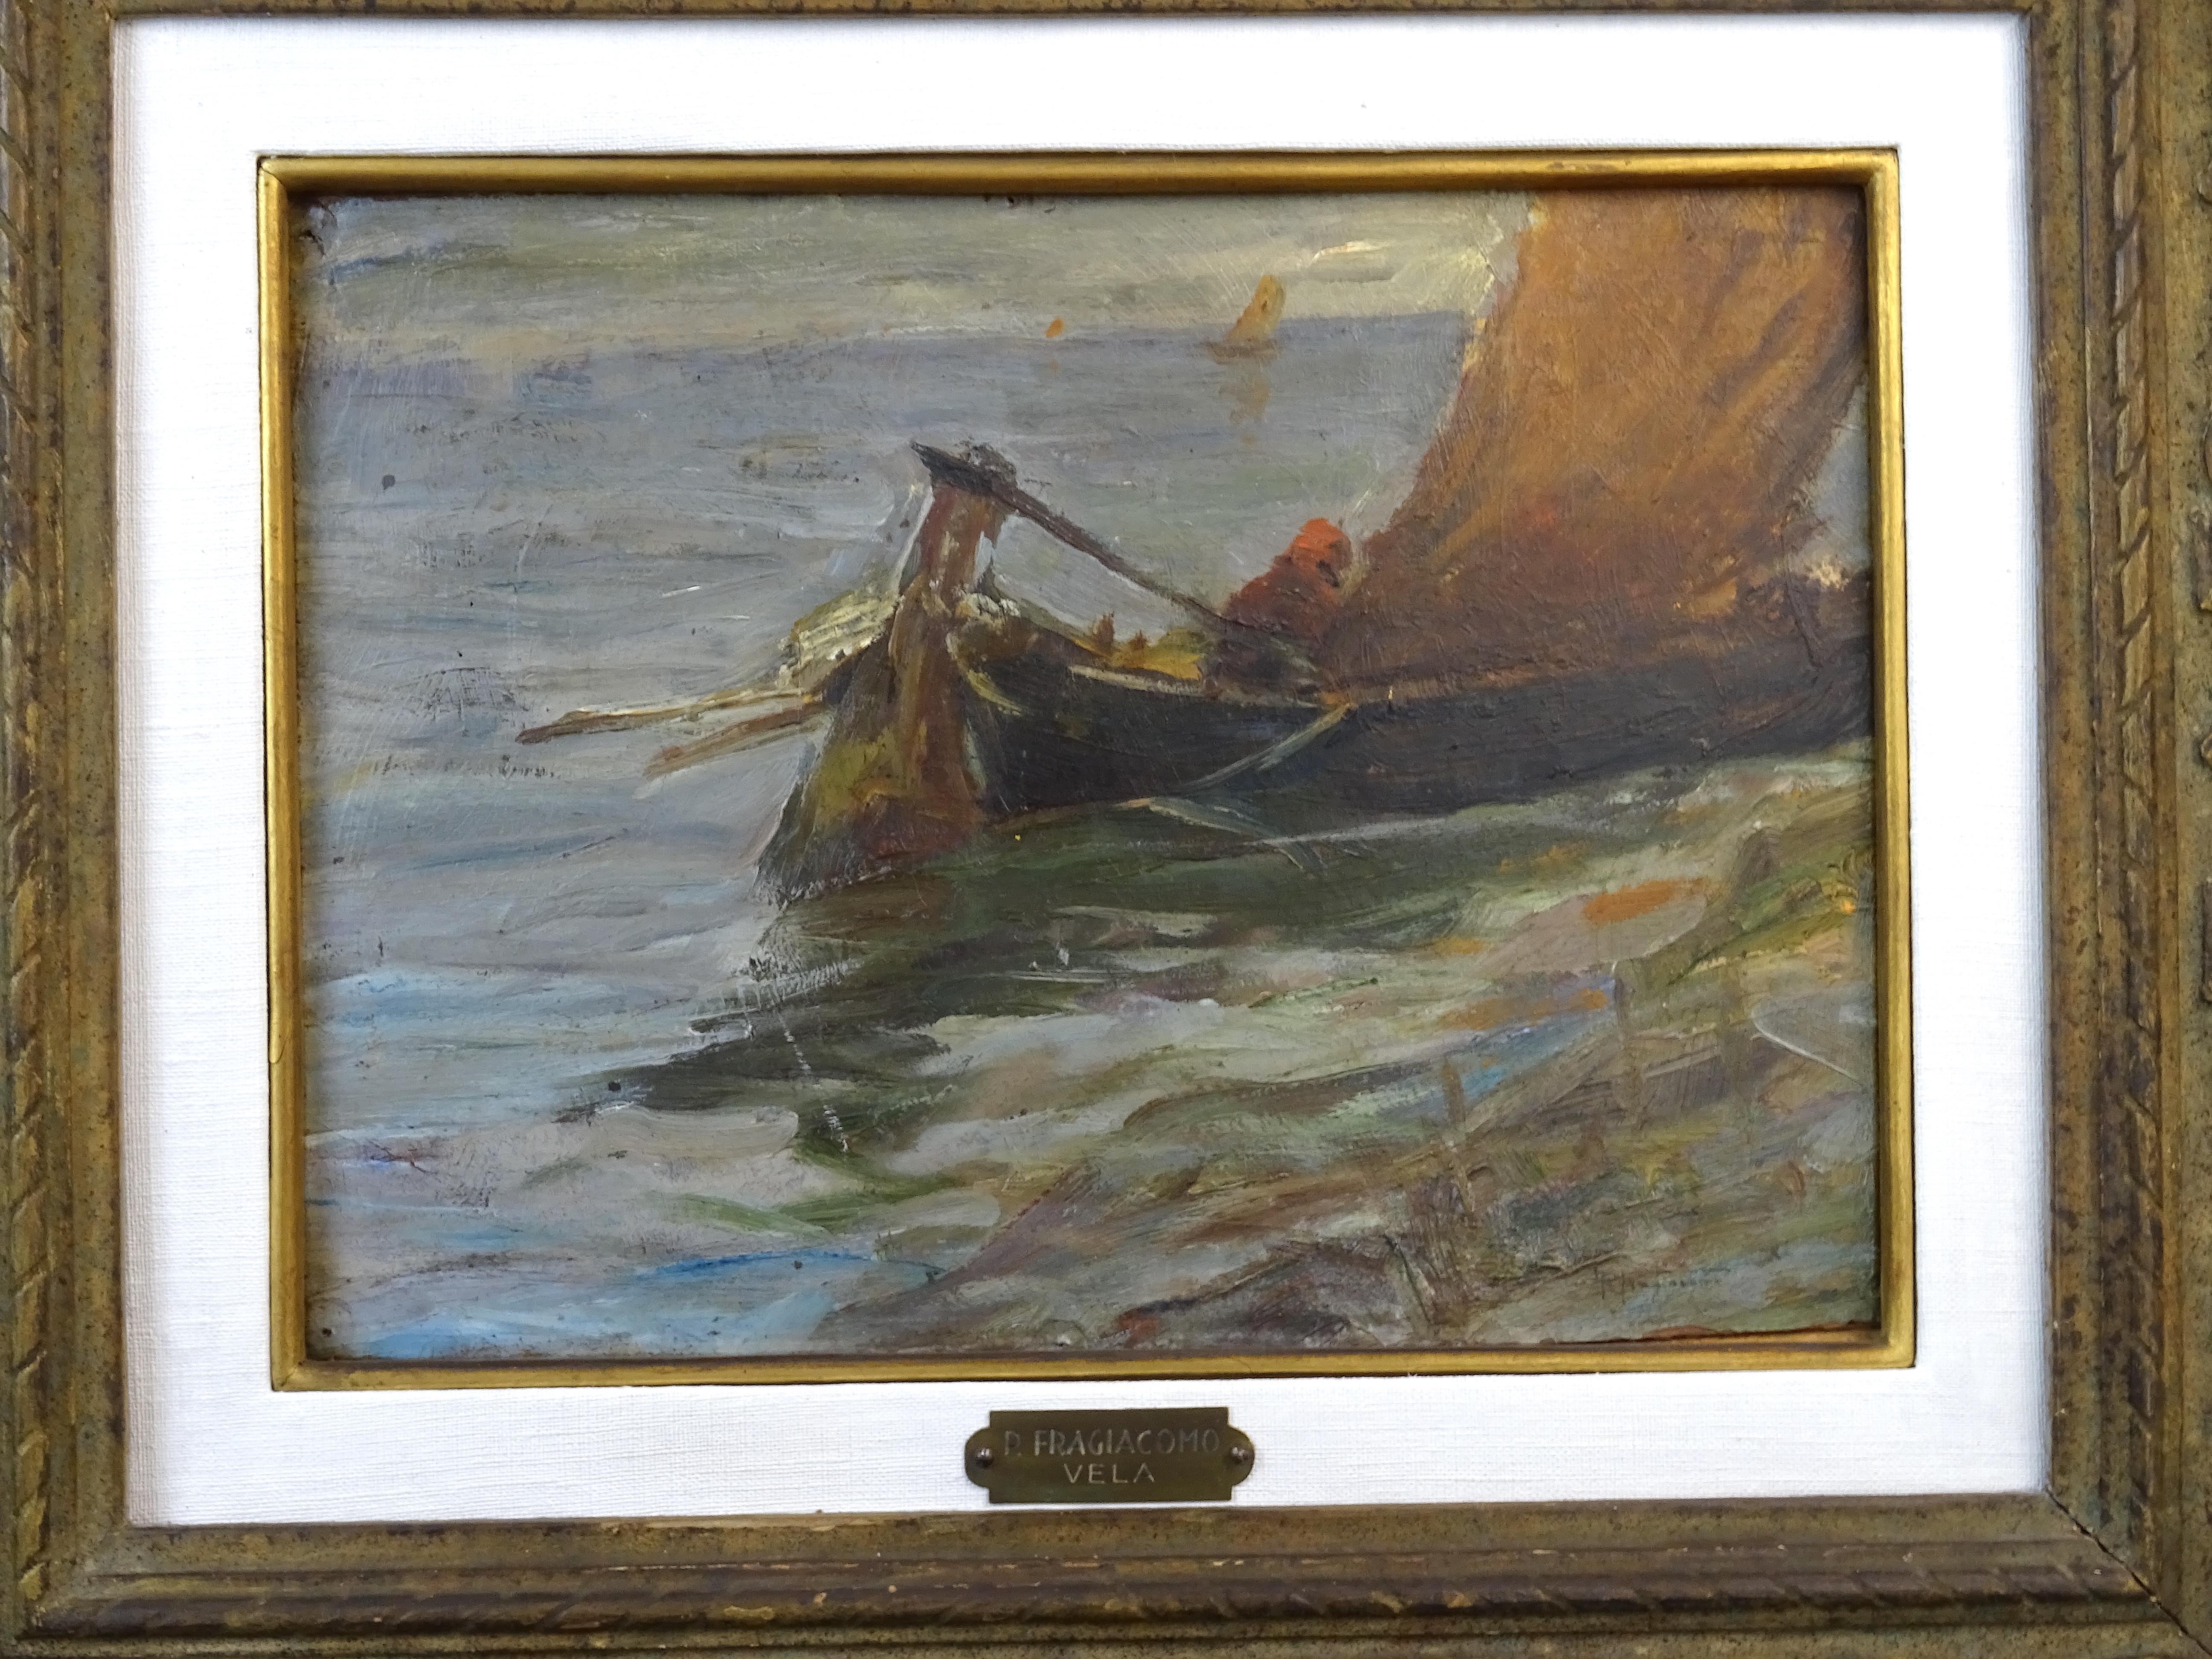 Oil painting on panel by the artist P. Fragiacomo, around the 1910s.
The work entitled 'Sail' depicts a small sailboat in the middle of a sea with a figure on board from behind, a typical subject of his artistic production, as he was very fond of